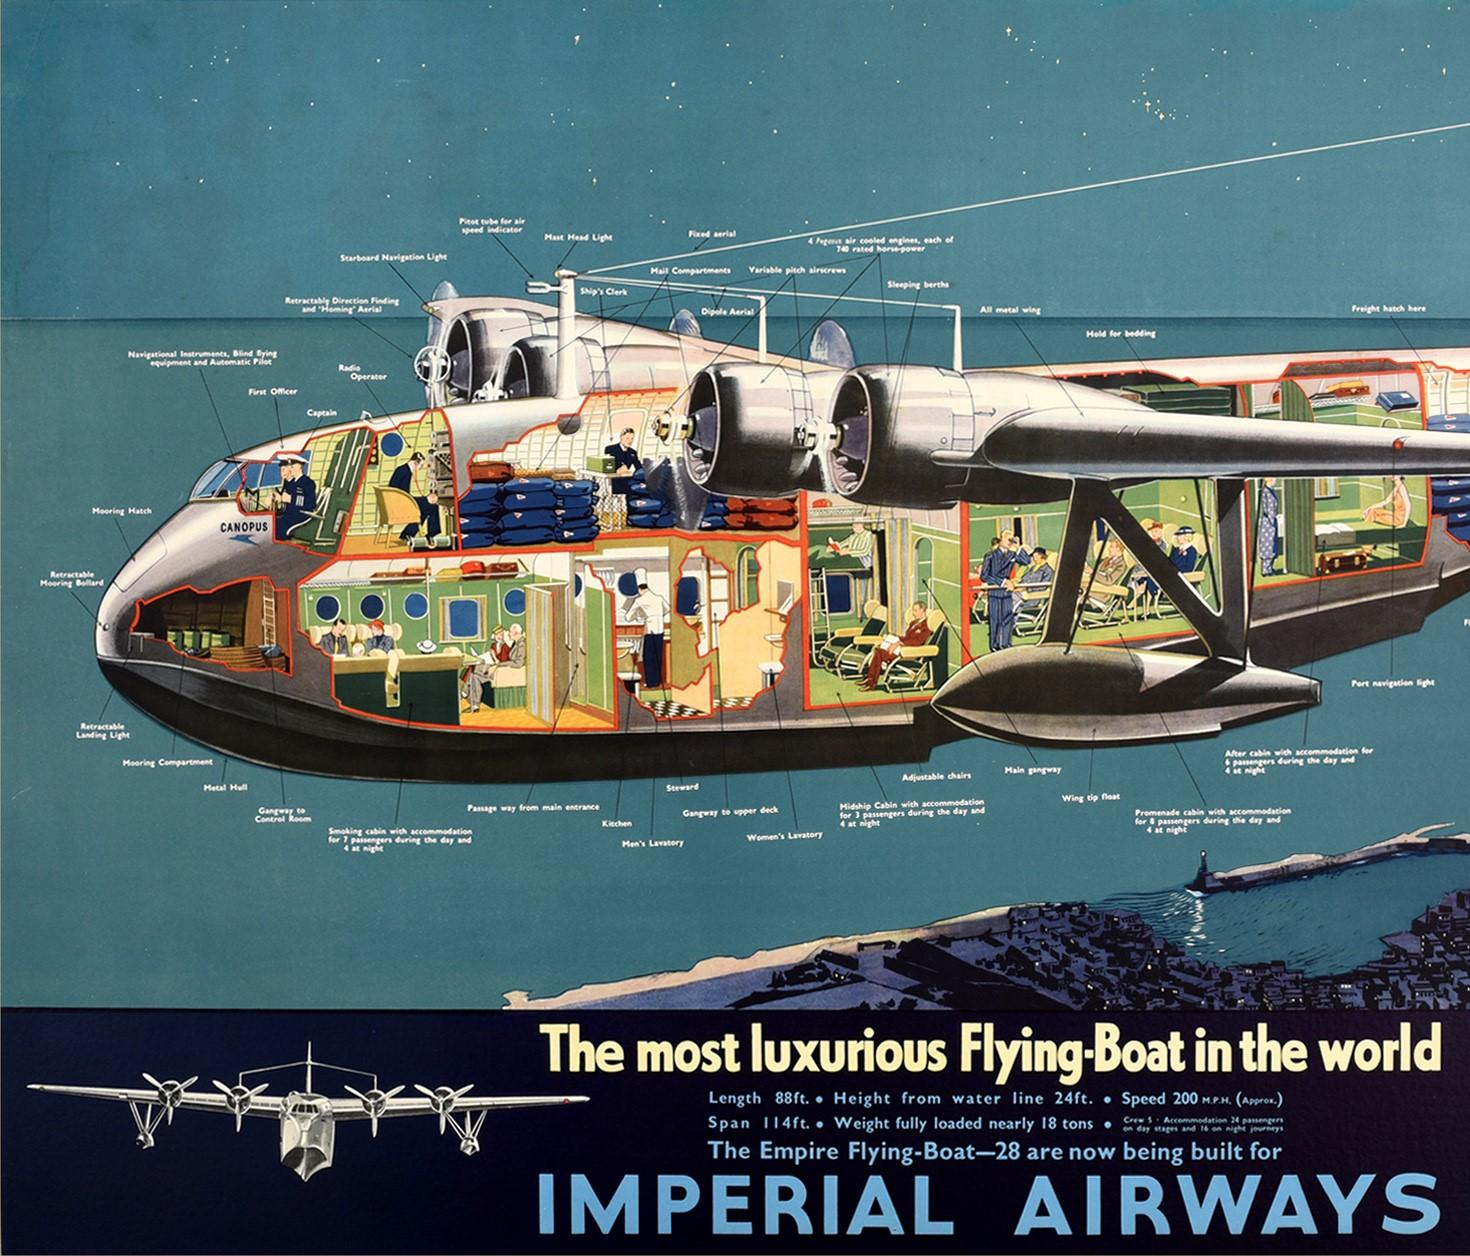 Original vintage travel advertising poster for The Empire Flying-Boat of Imperial Airways - Length 88ft Height from water line 24ft Speed 200mph Span 114ft Weight fully loaded 18 tons - 28 are now being built for use on the Empire Routes - Crew 4